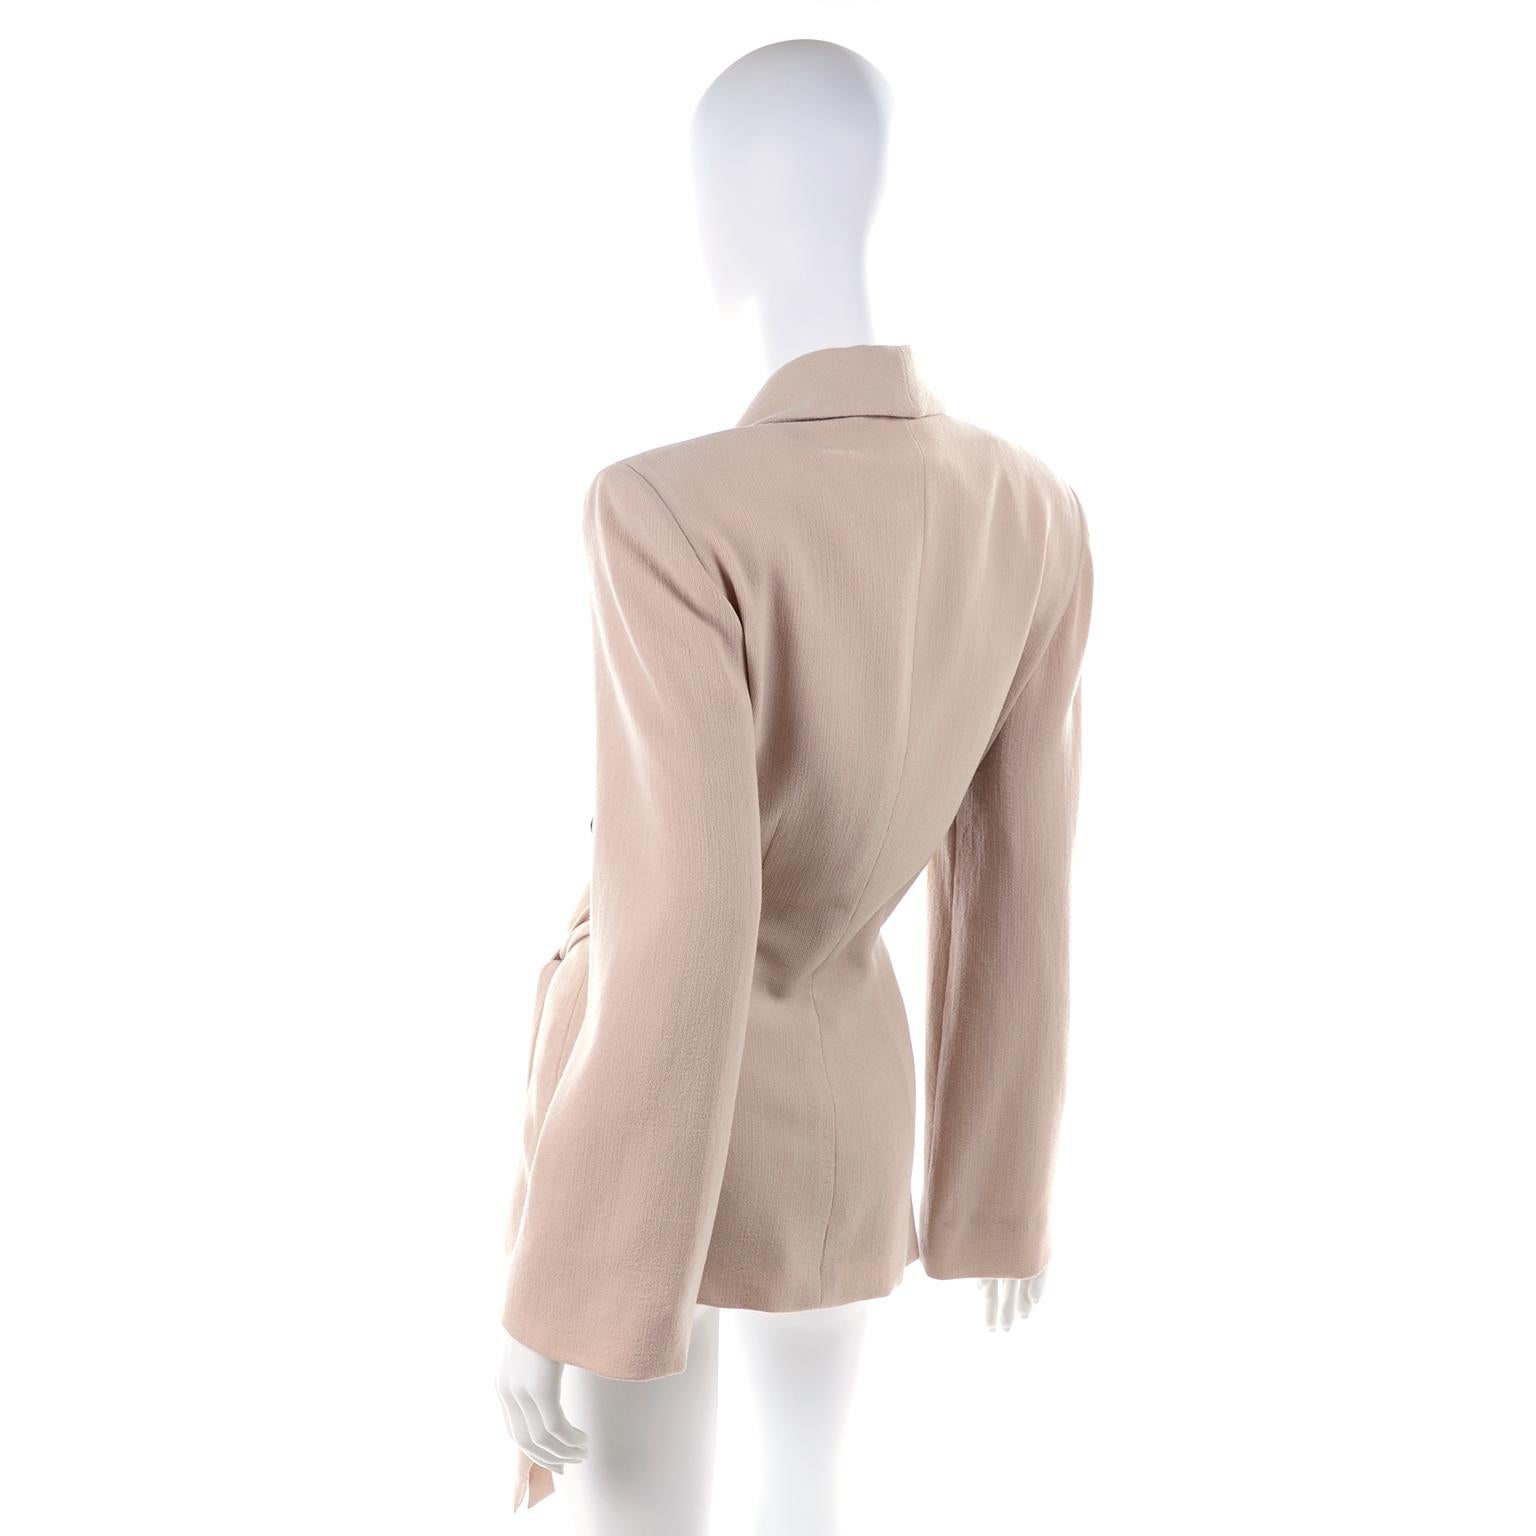 Gray 1990s Vintage Donna Karan Draped Tan Wool Blazer New With Tag Attached